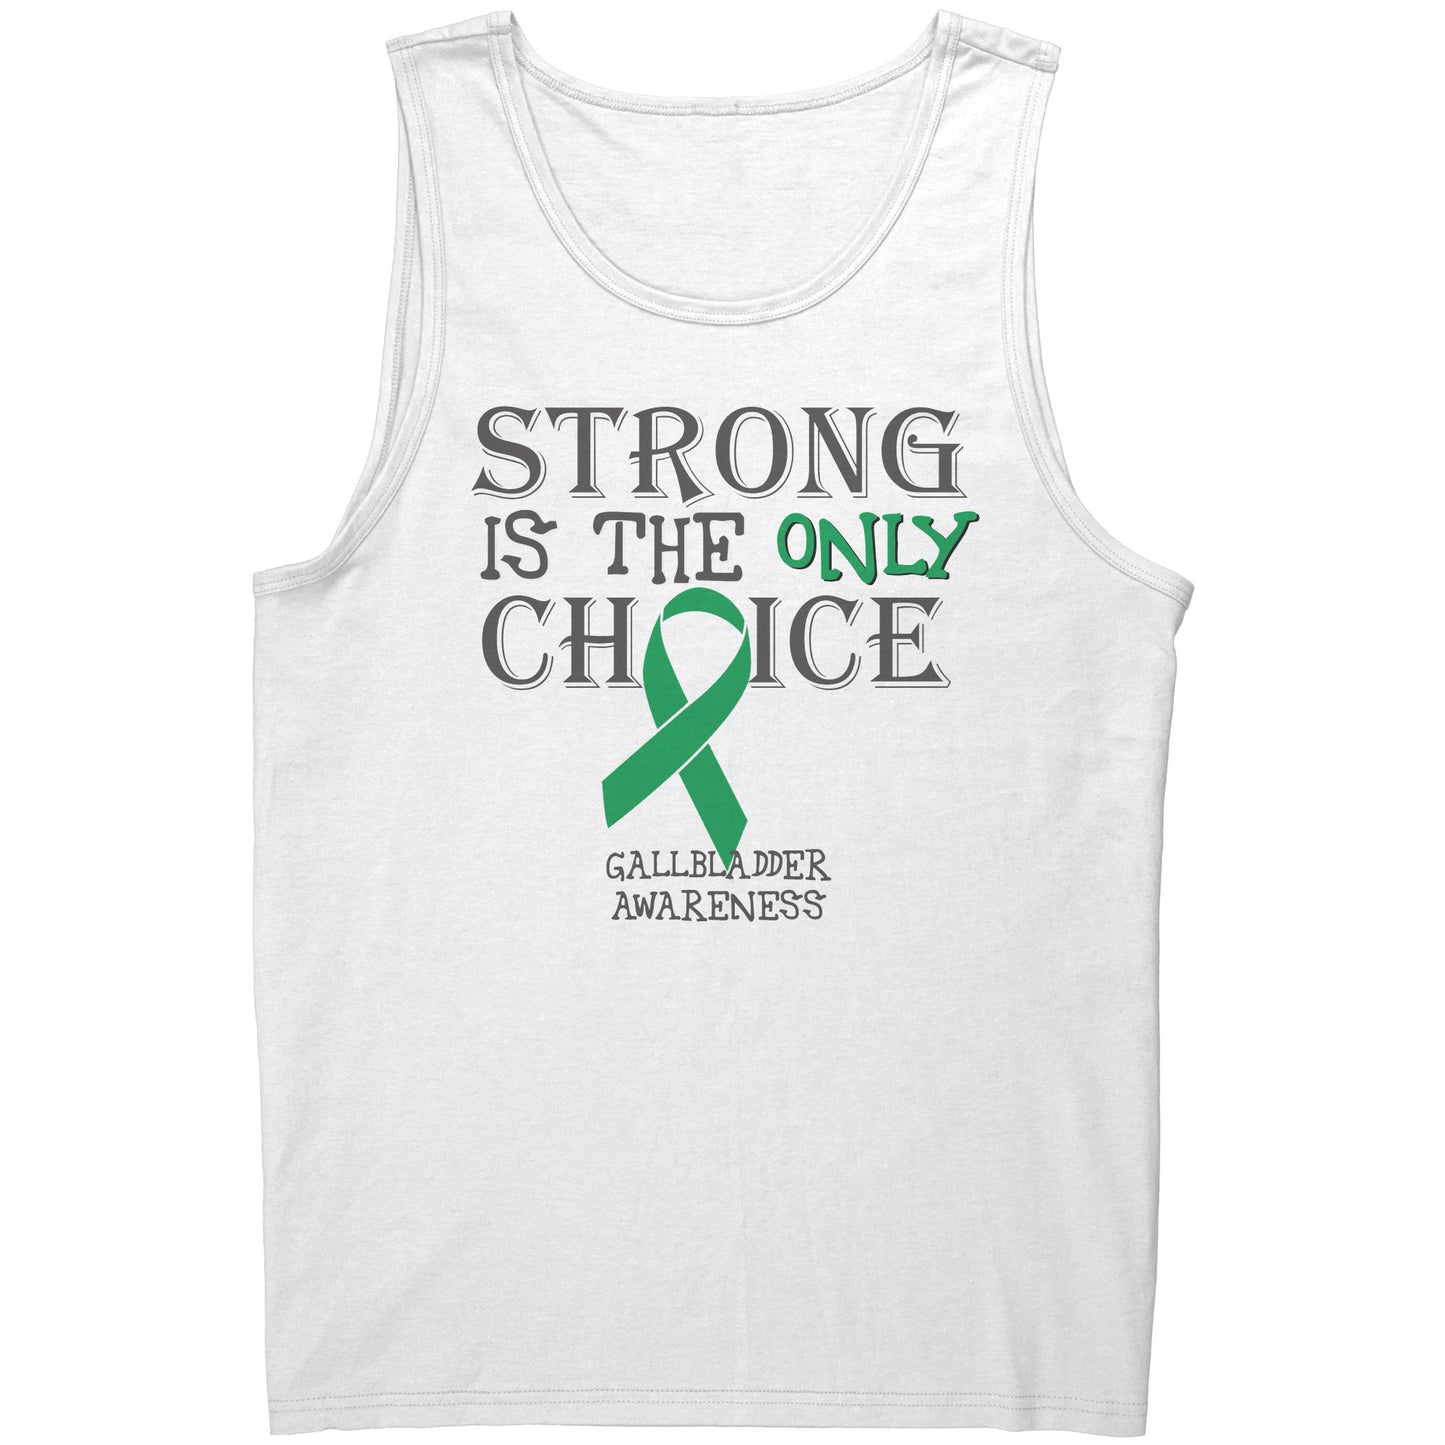 Strong is the Only Choice -Gallbladder Cancer Awareness T-Shirt, Hoodie, Tank